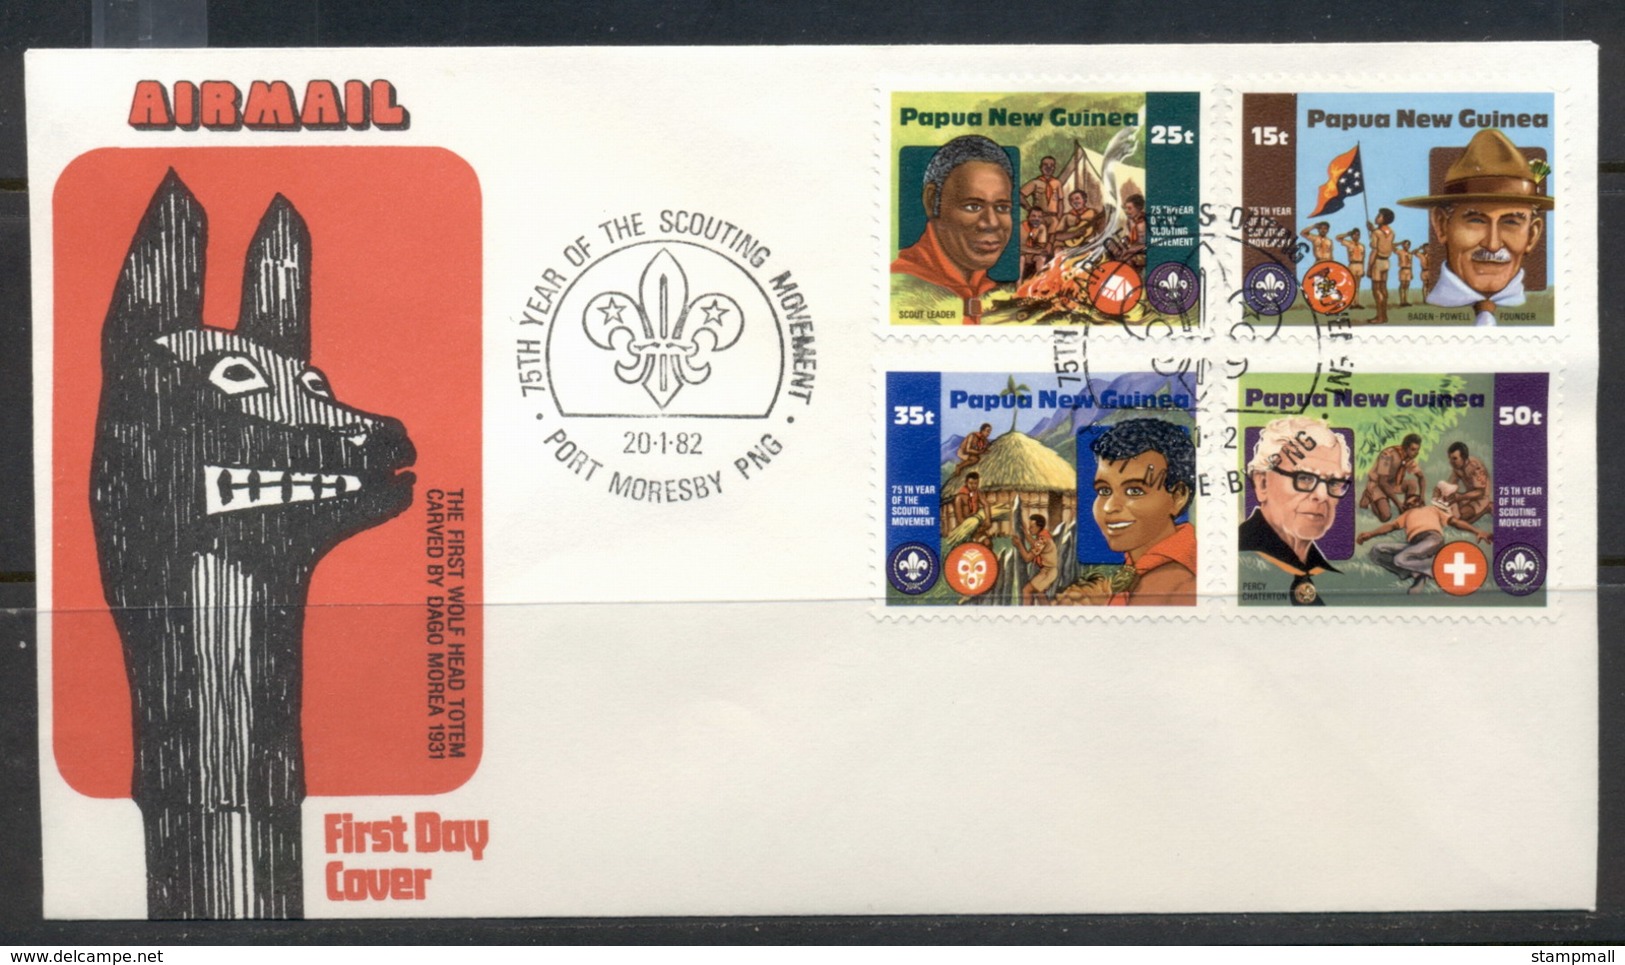 PNG 1982 Scouts FDC - Papua New Guinea